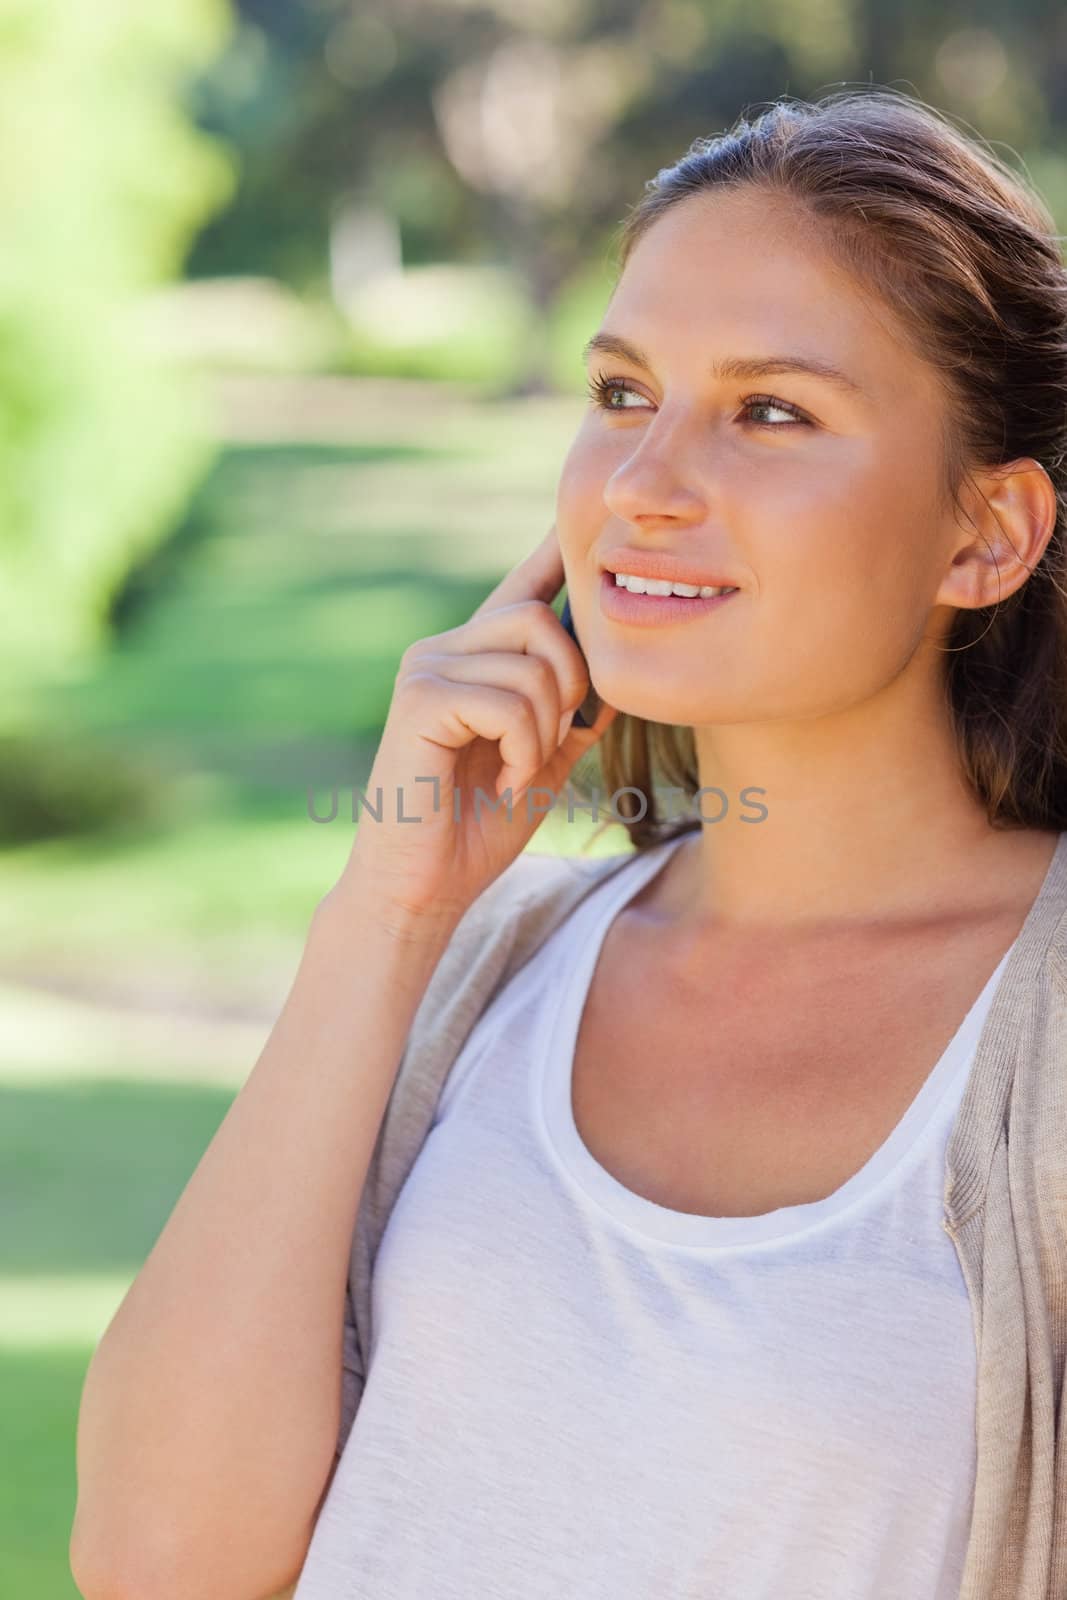 Smiling young woman on her mobile phone in the park